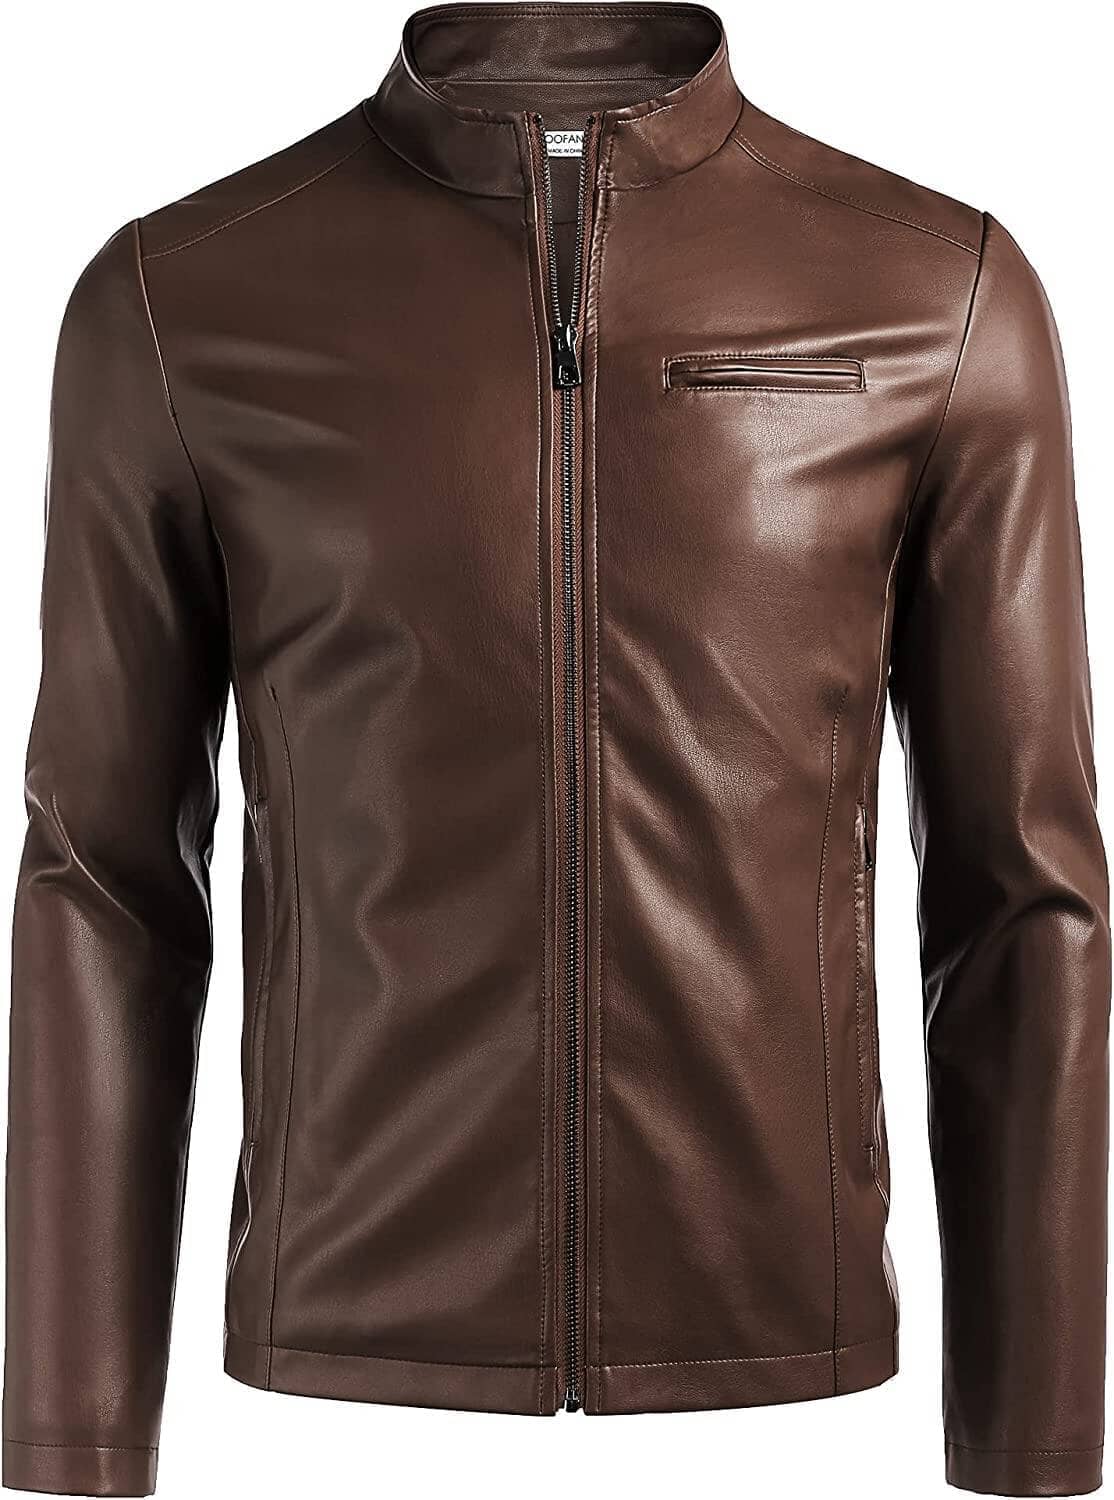 Motorcycle Leather Lightweight Jacket Coat (US Only) Jackets COOFANDY Store Dark Brown S 